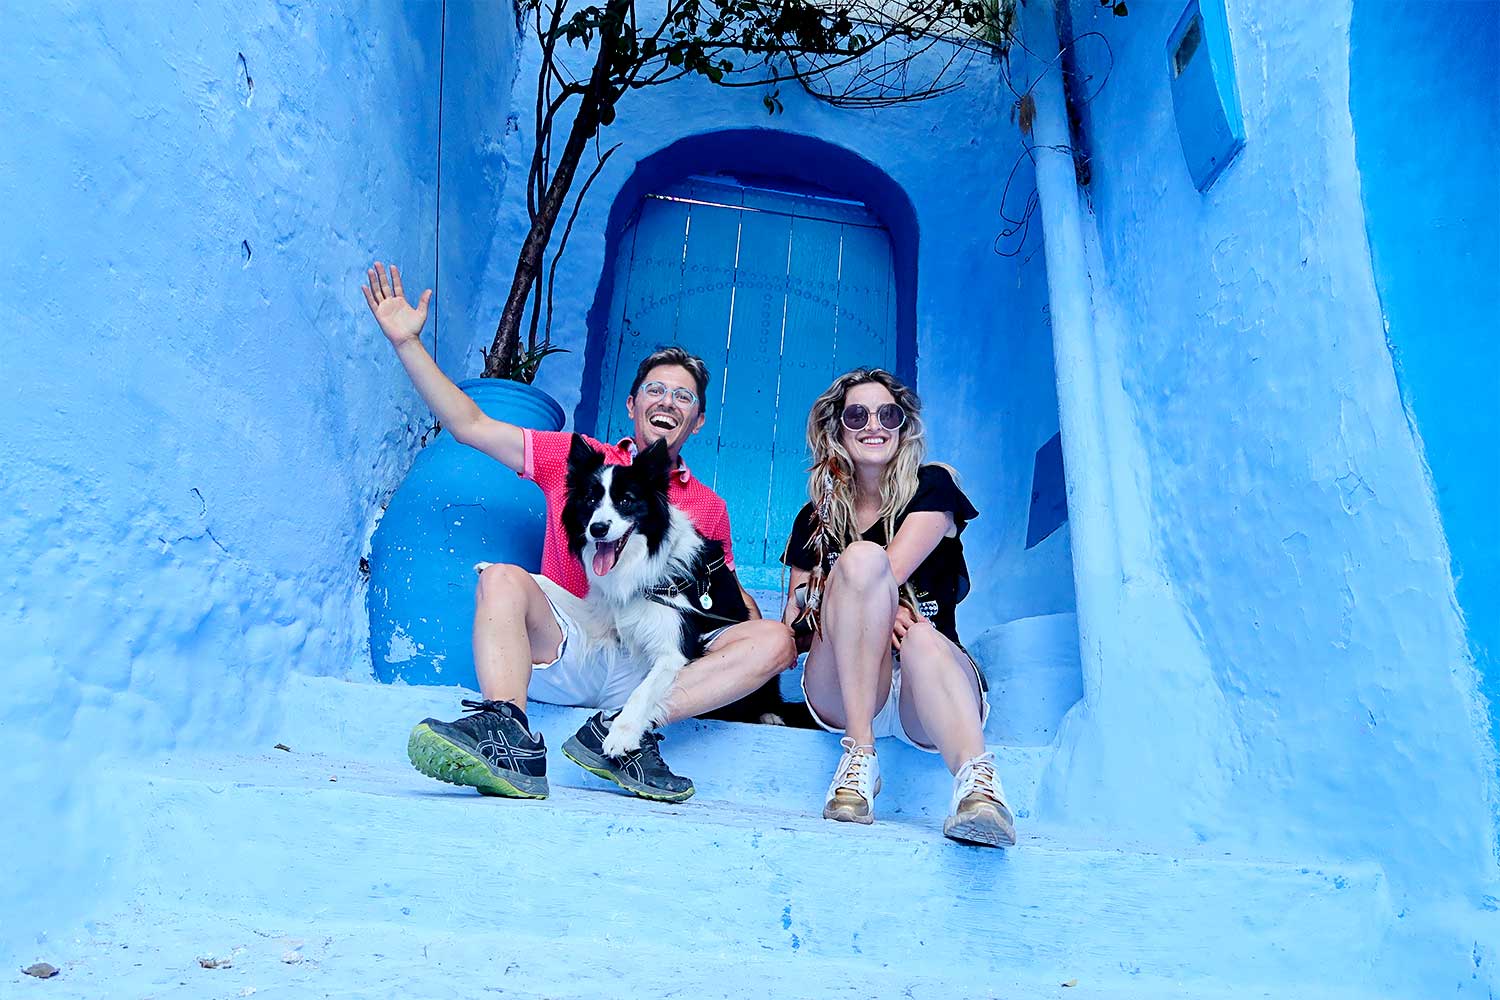 Pedro, Rafa and Sara in Chefchaouen, the blue pearl of Morocco.